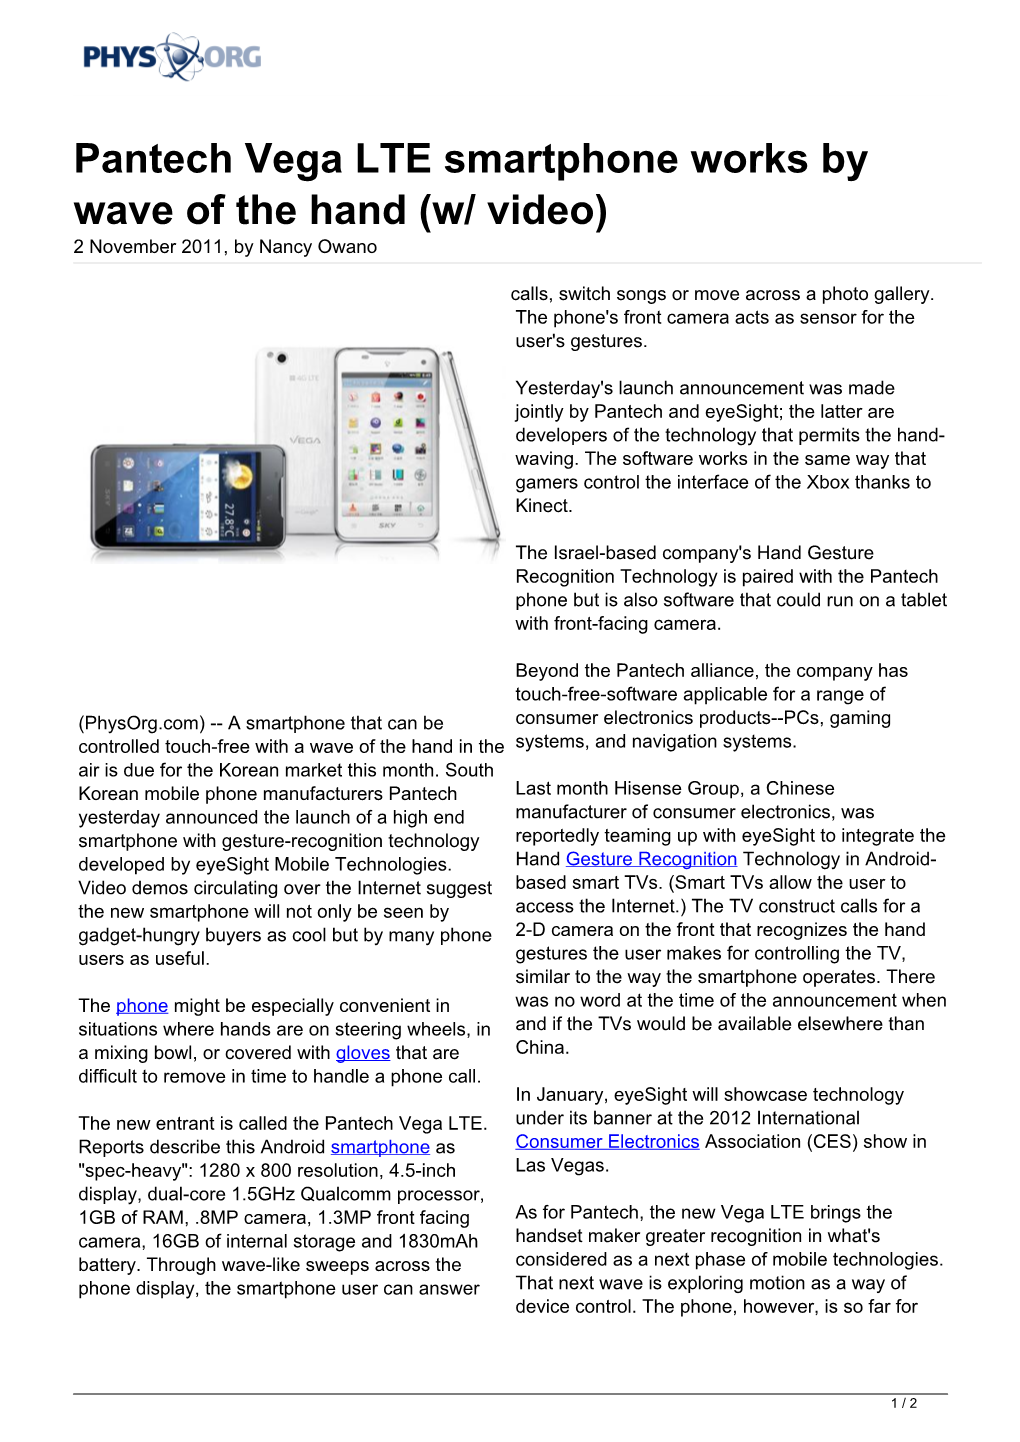 Pantech Vega LTE Smartphone Works by Wave of the Hand (W/ Video) 2 November 2011, by Nancy Owano